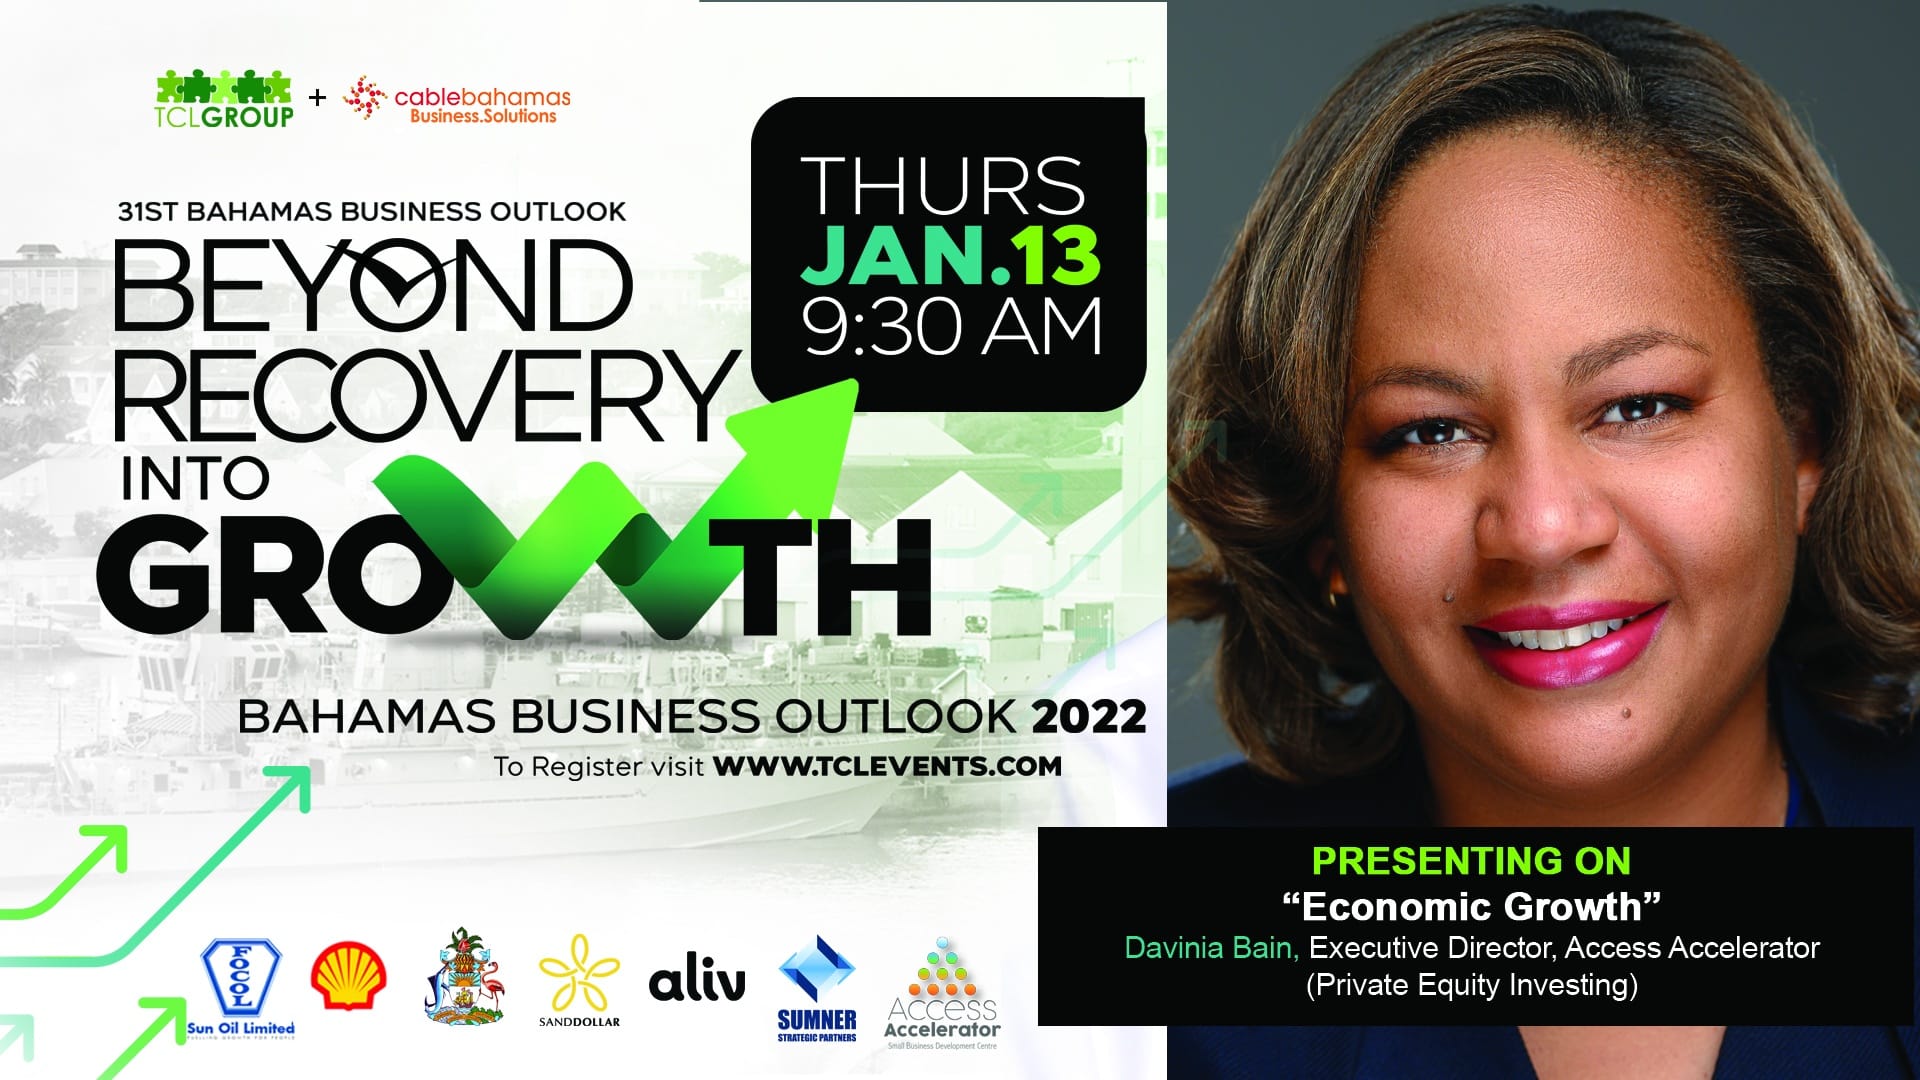 31st Bahamas Business Outlook promotional graphic flier